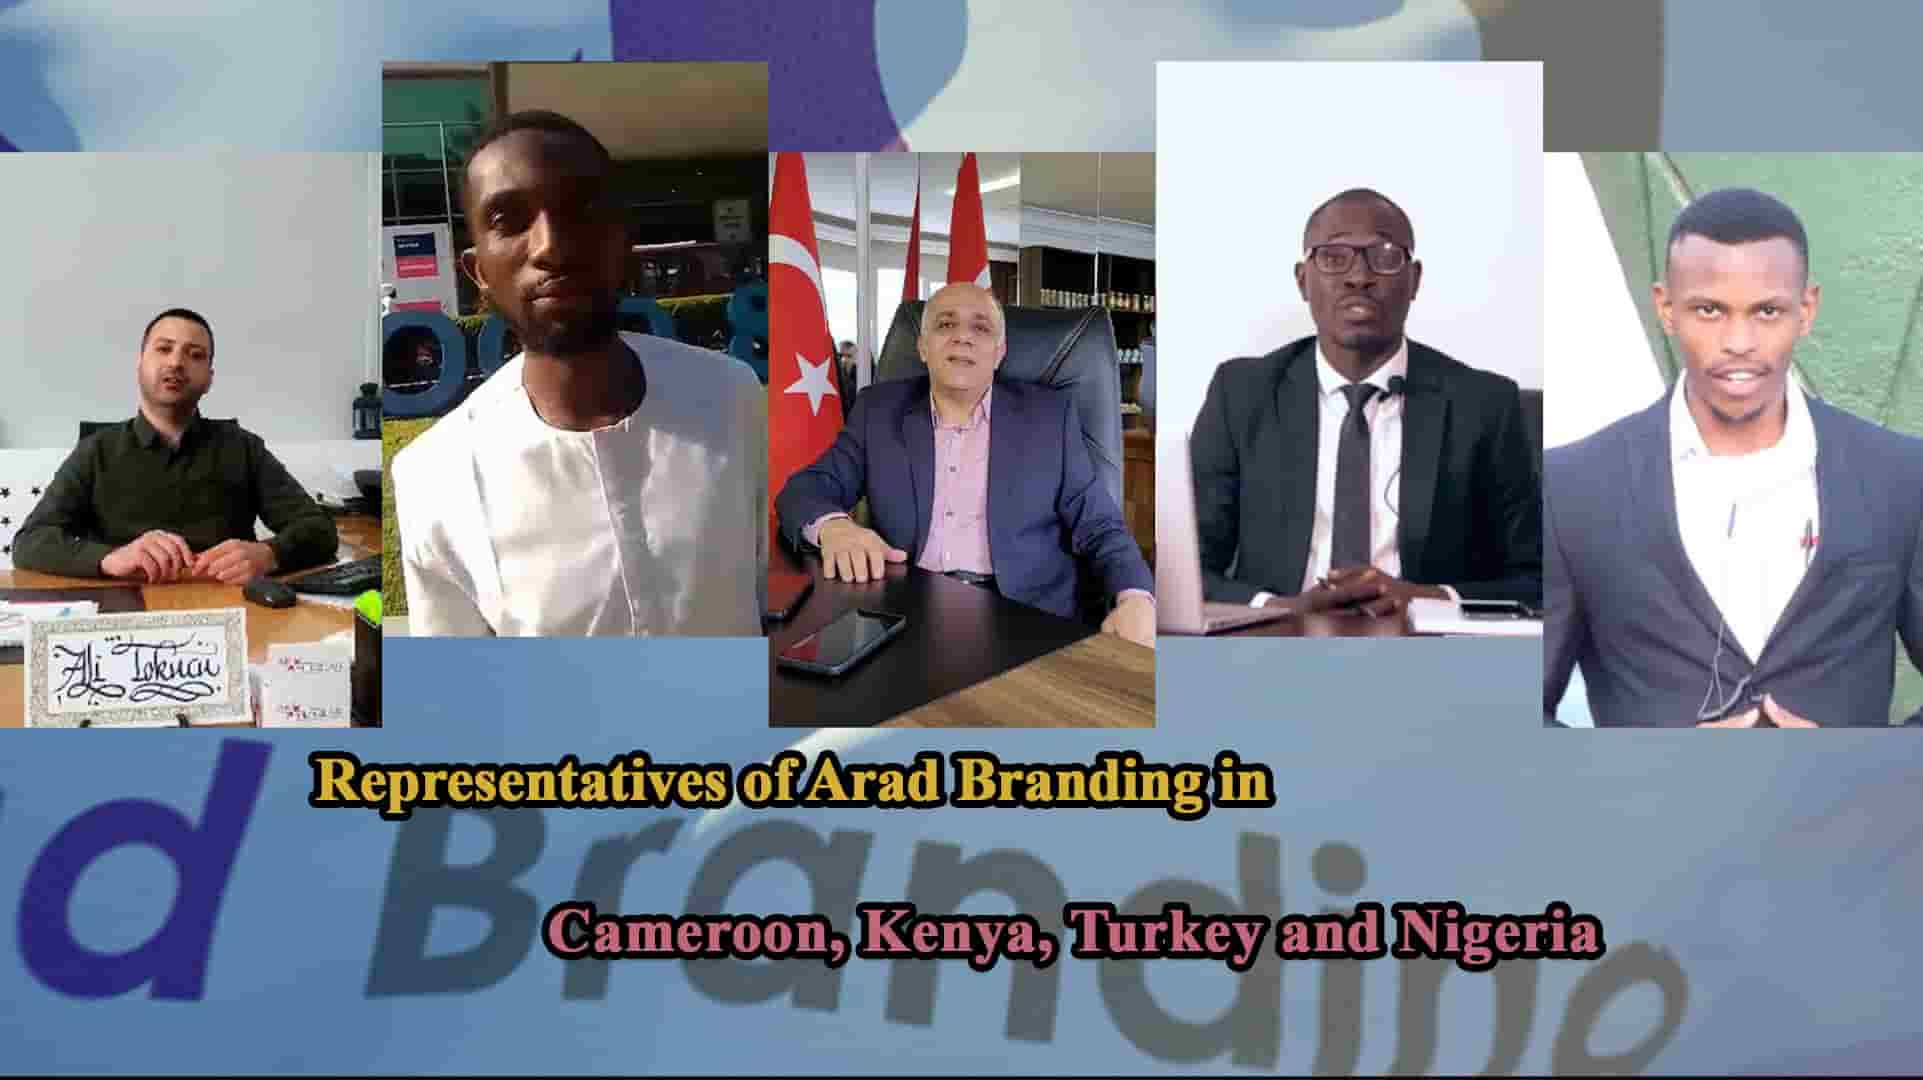 Opening of Arad Branding office in Cameroon + Turkey office activities + New representatives in Nigeria, Turkey and Kenya + We stand until we take our last breath.